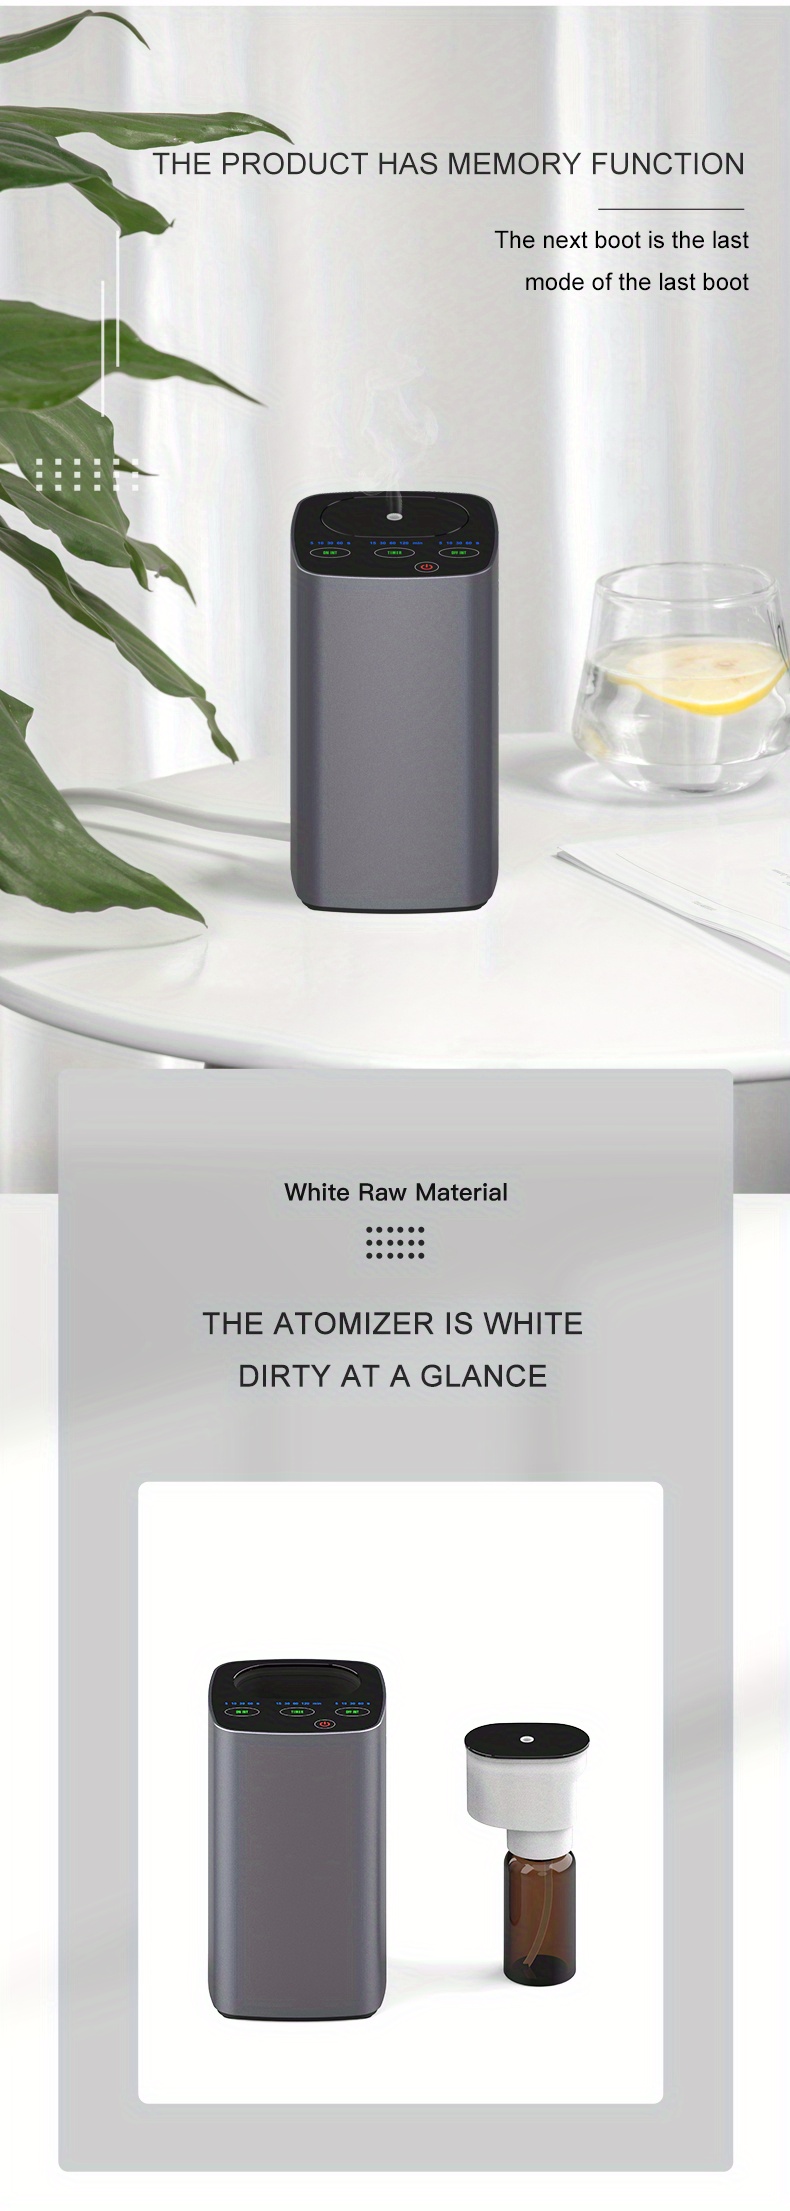 10ml aluminum alloy portable diffuser with memory mode and timing function for car office and bedroom enjoy pure essential oils anywhere details 5